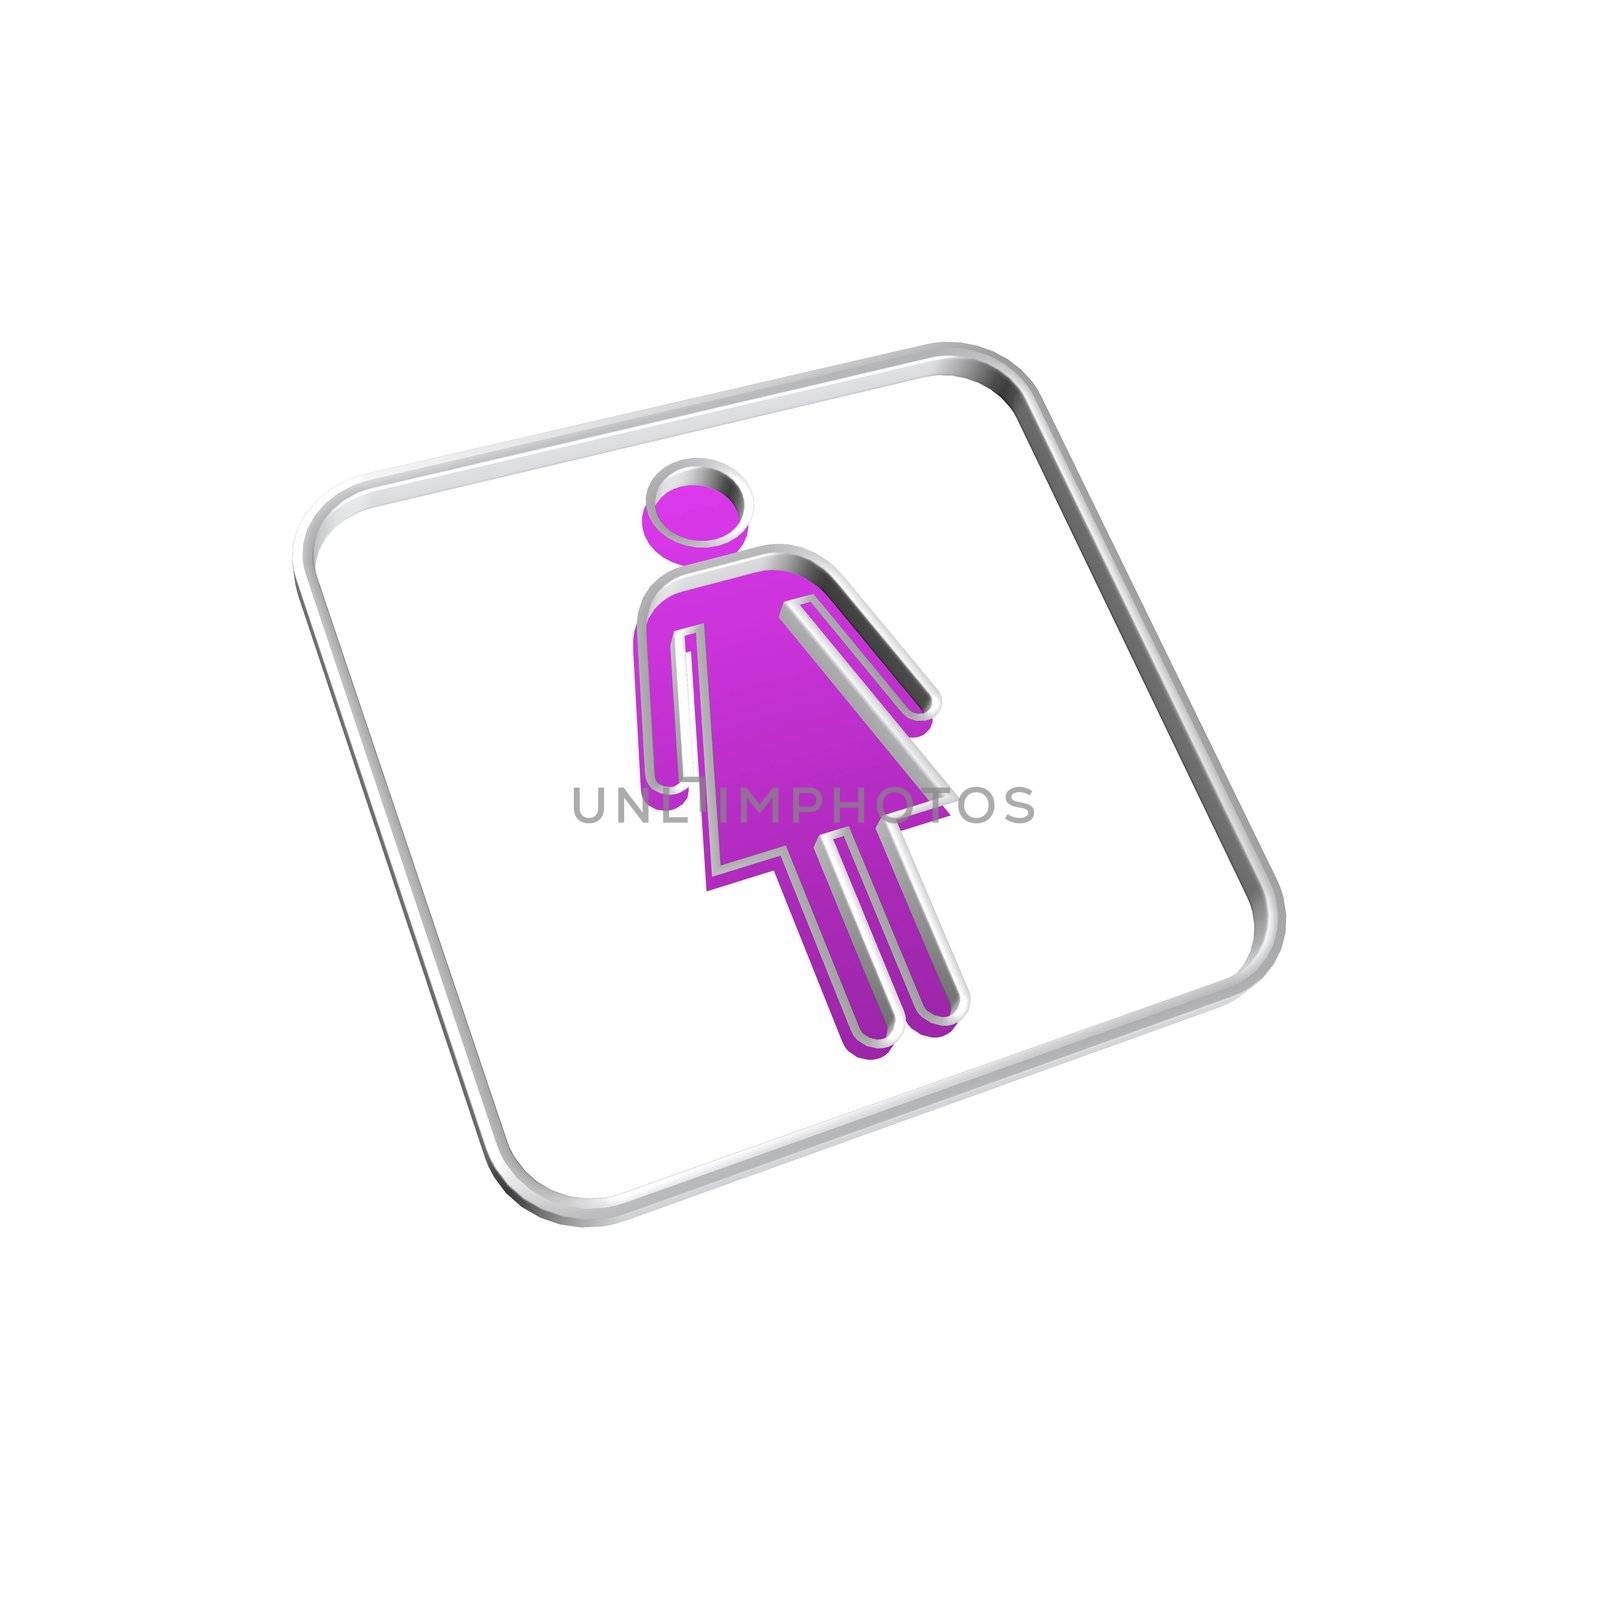 Icon button illustrations isolated on a white background